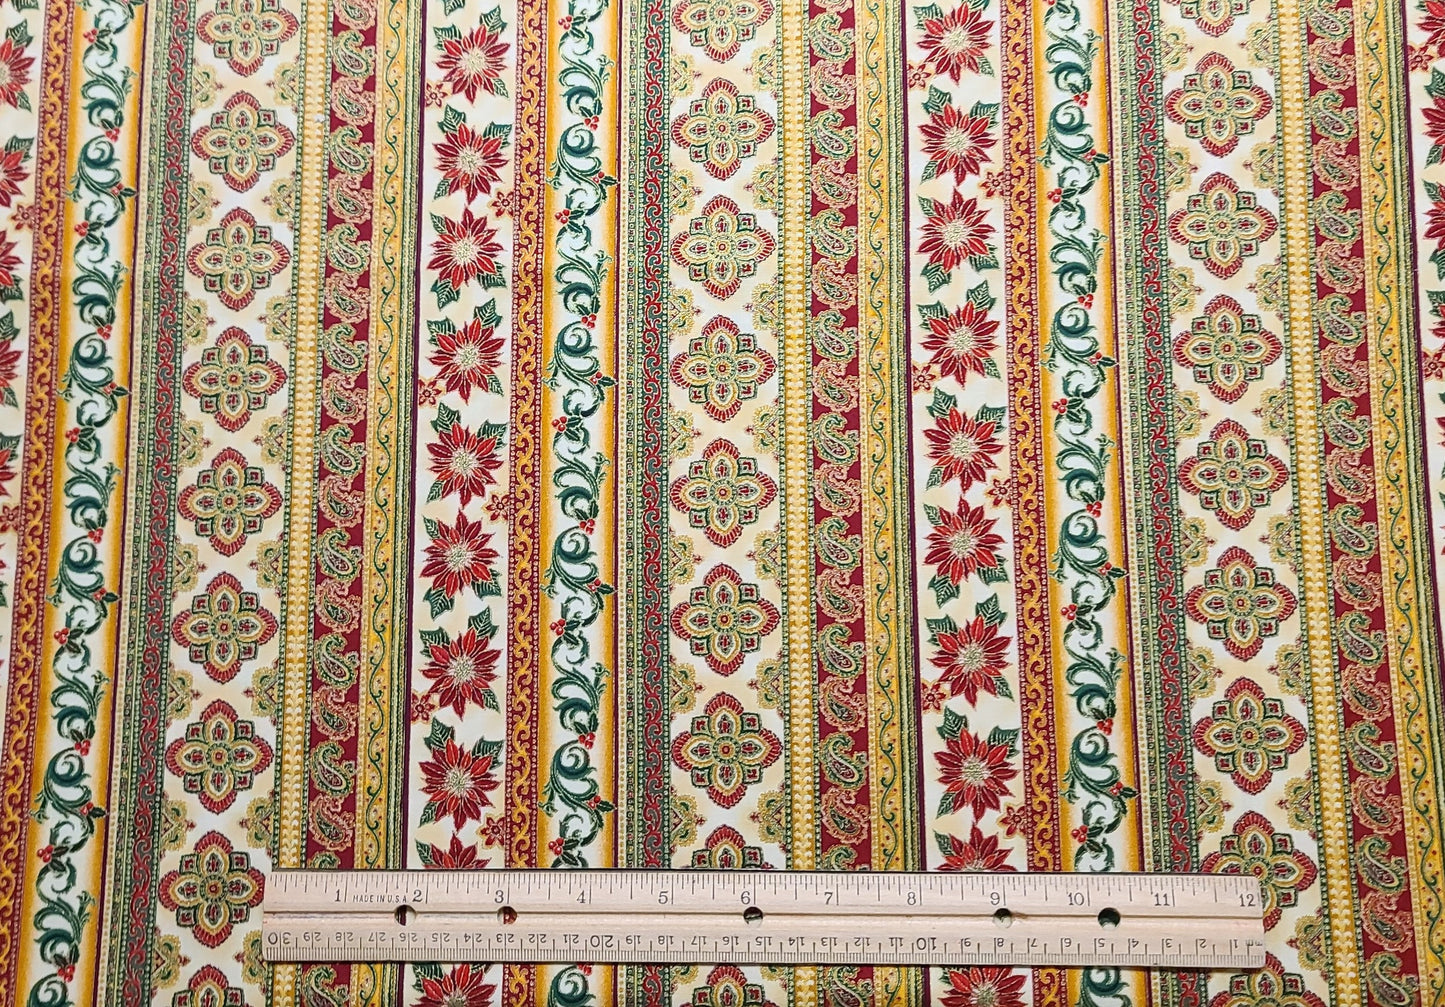 Woodland Splendor 2 D#7121 - Red, Green, Gold and Cream Christmas Poinsettia, Paisley Medallion Stripe (Parallel to Selvage) Fabric